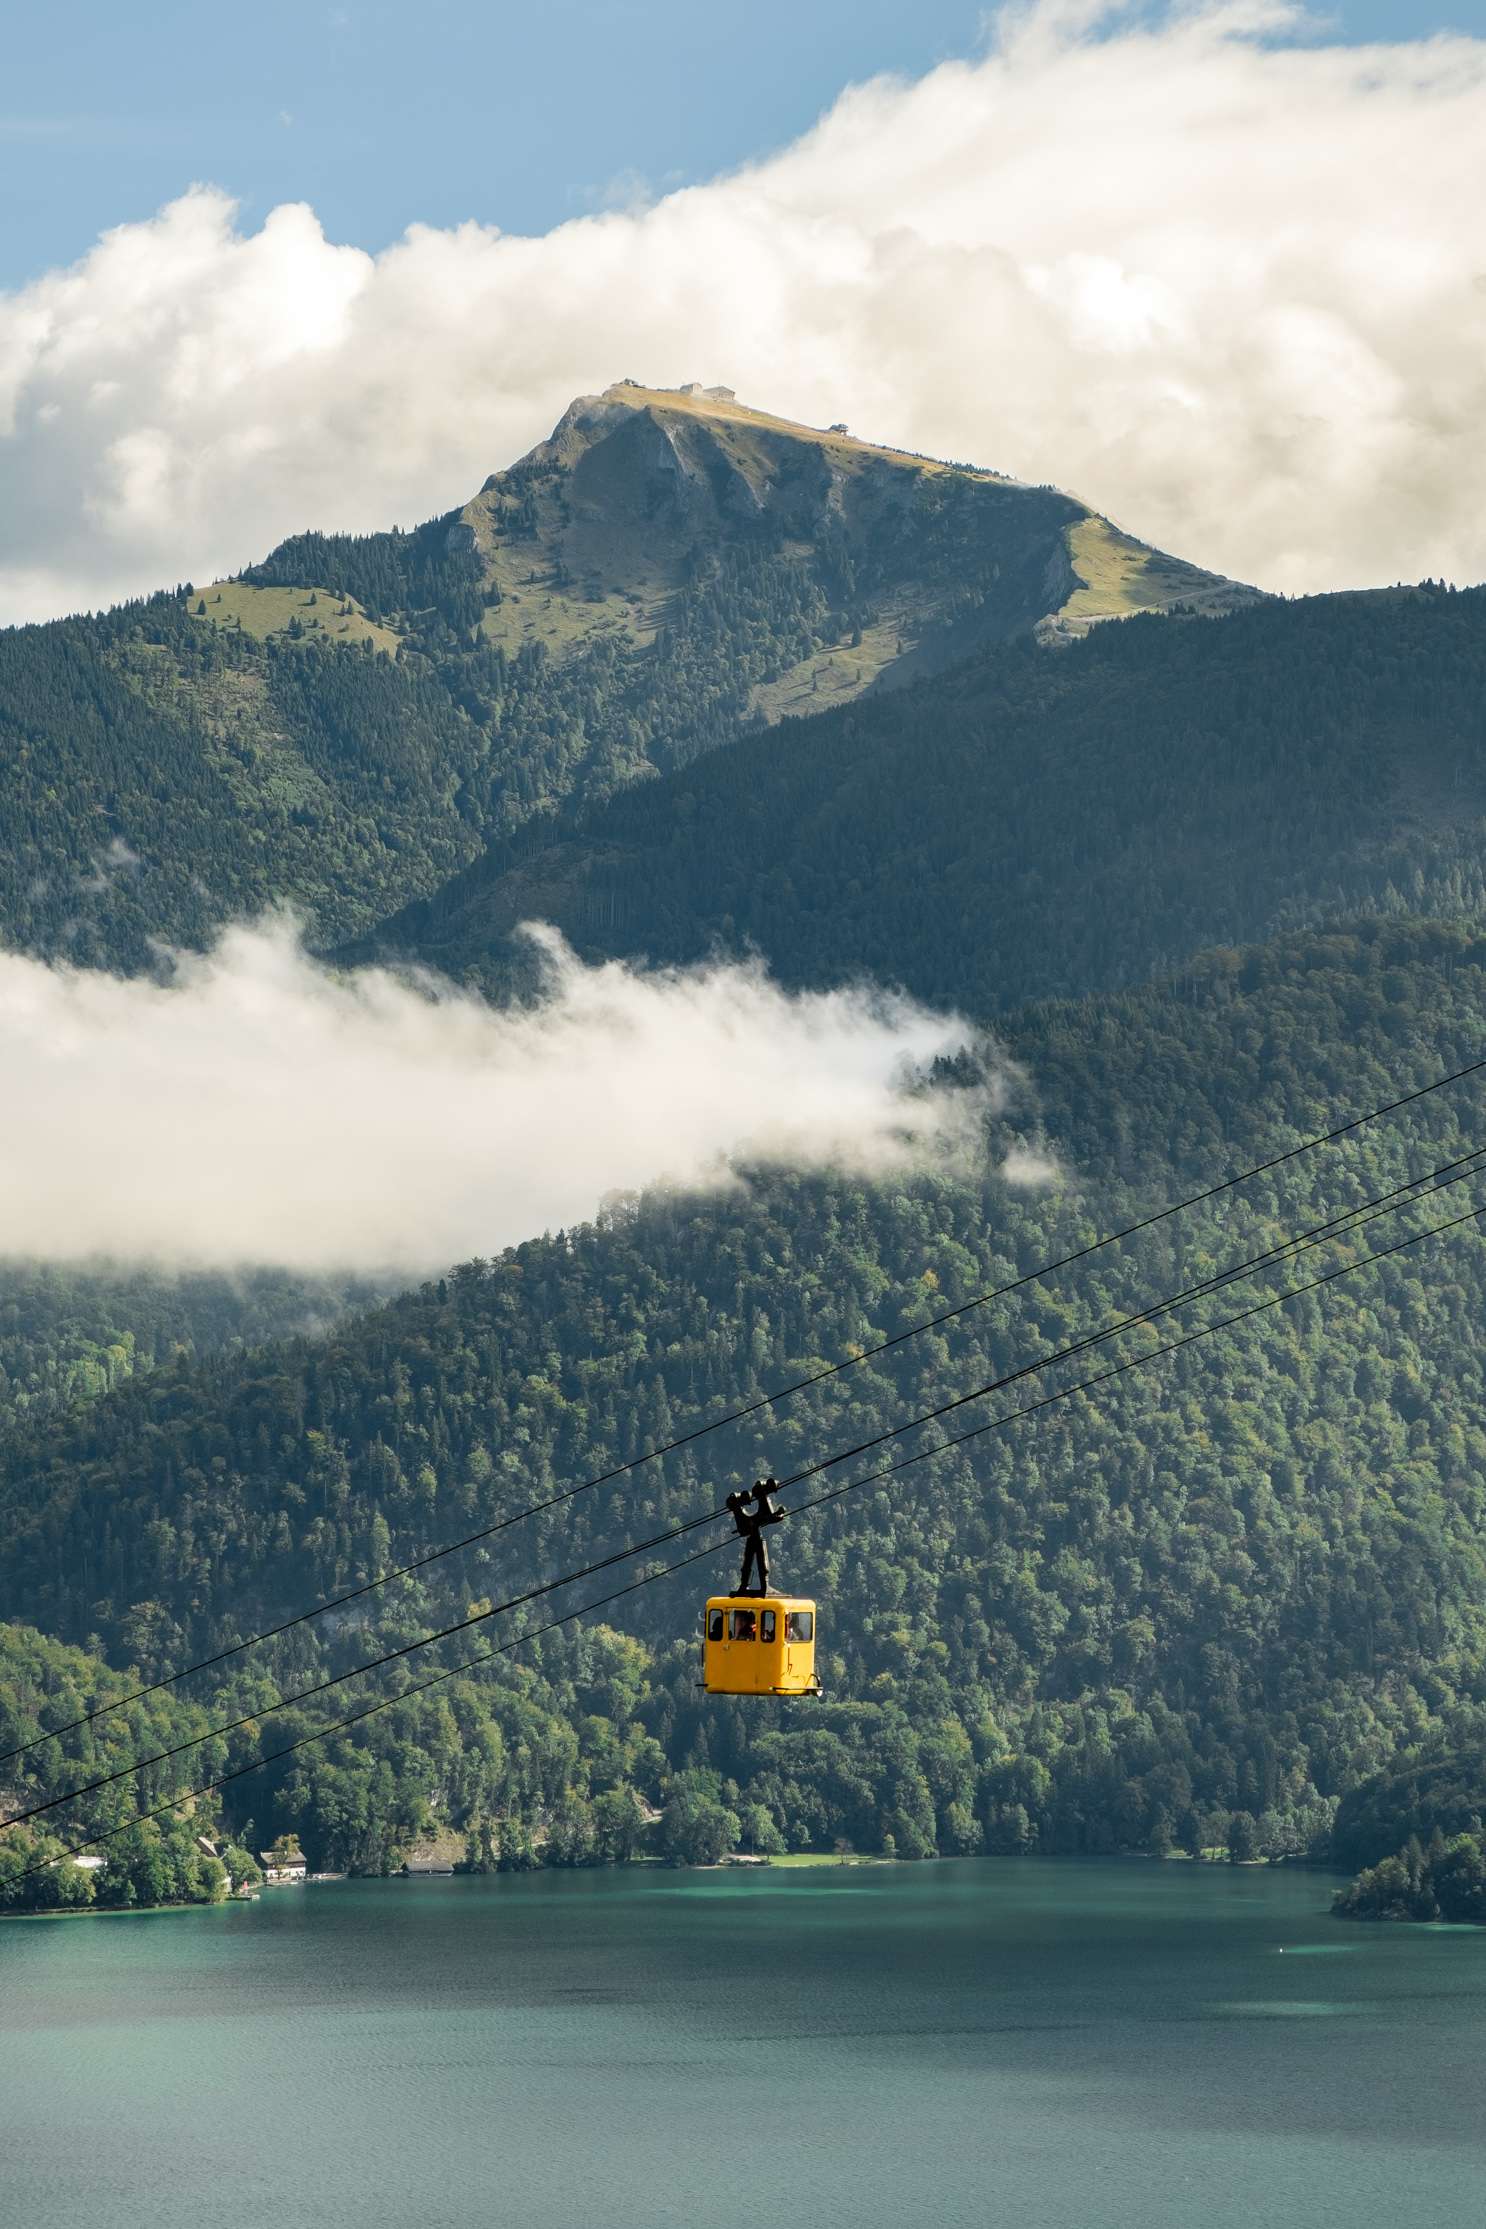 A cablecar engulfed by Schafberg as a backdrop